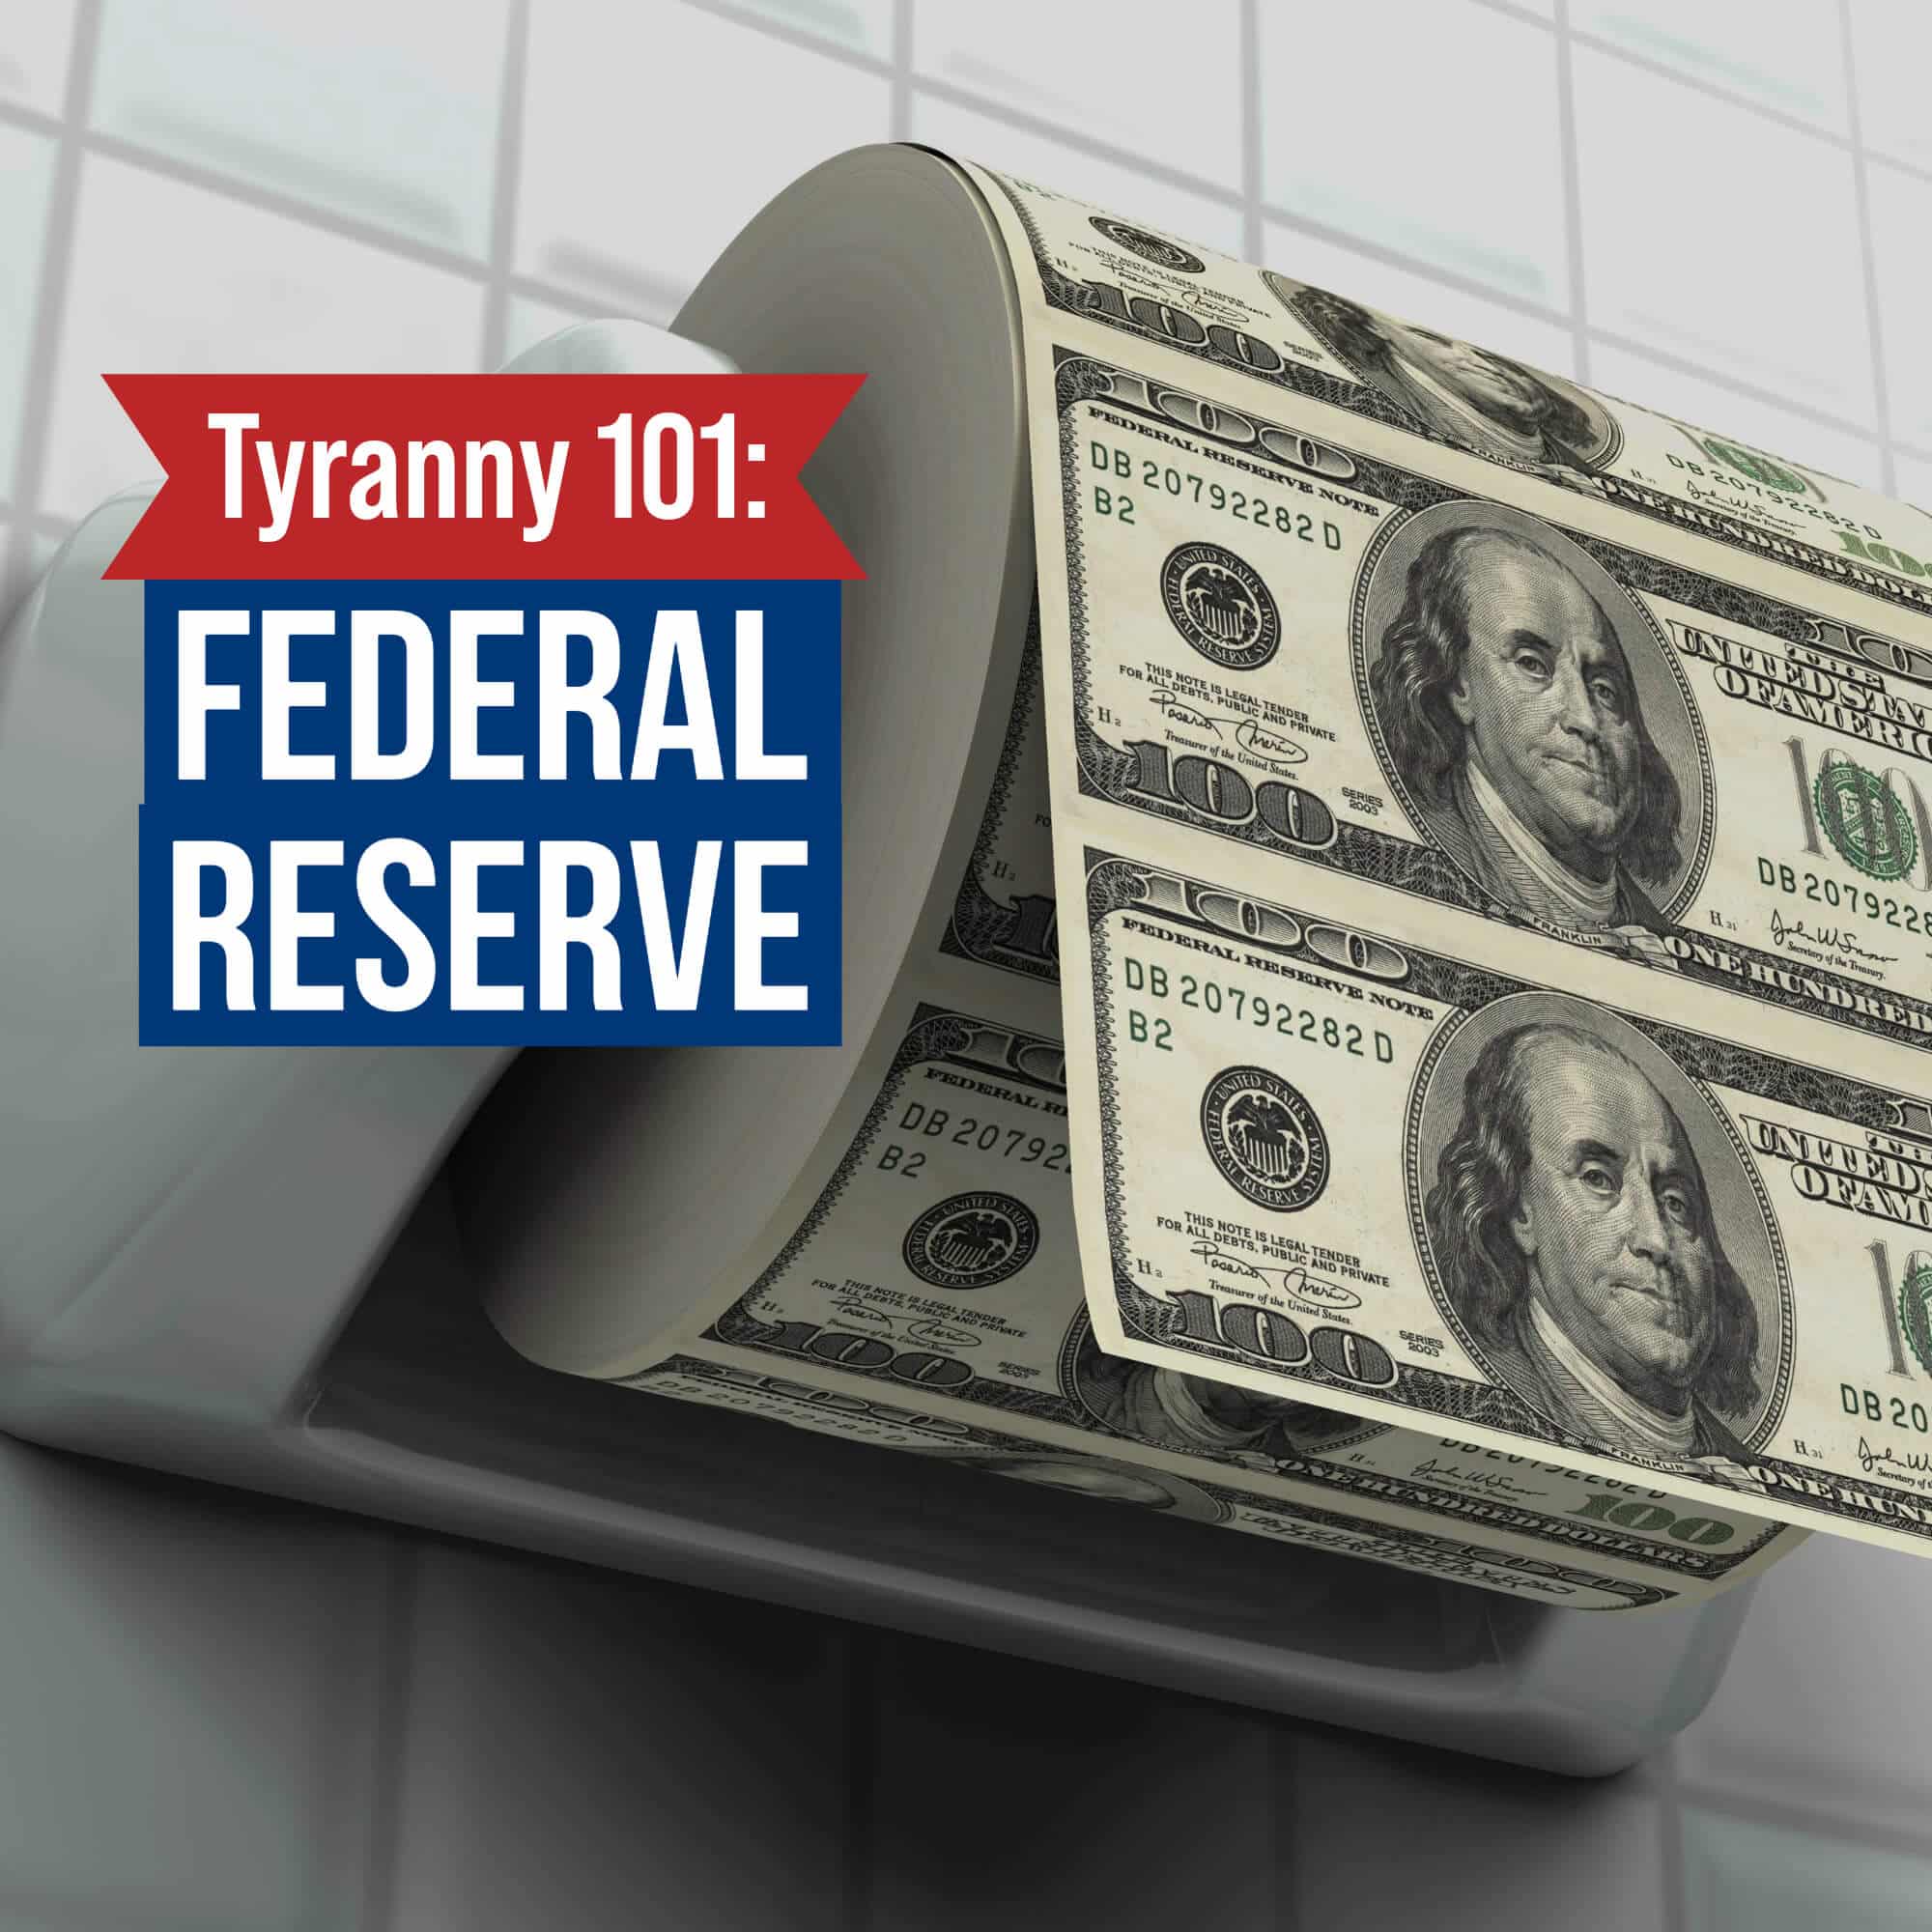 Tyranny 101: How the Federal Reserve Powers the Monster State